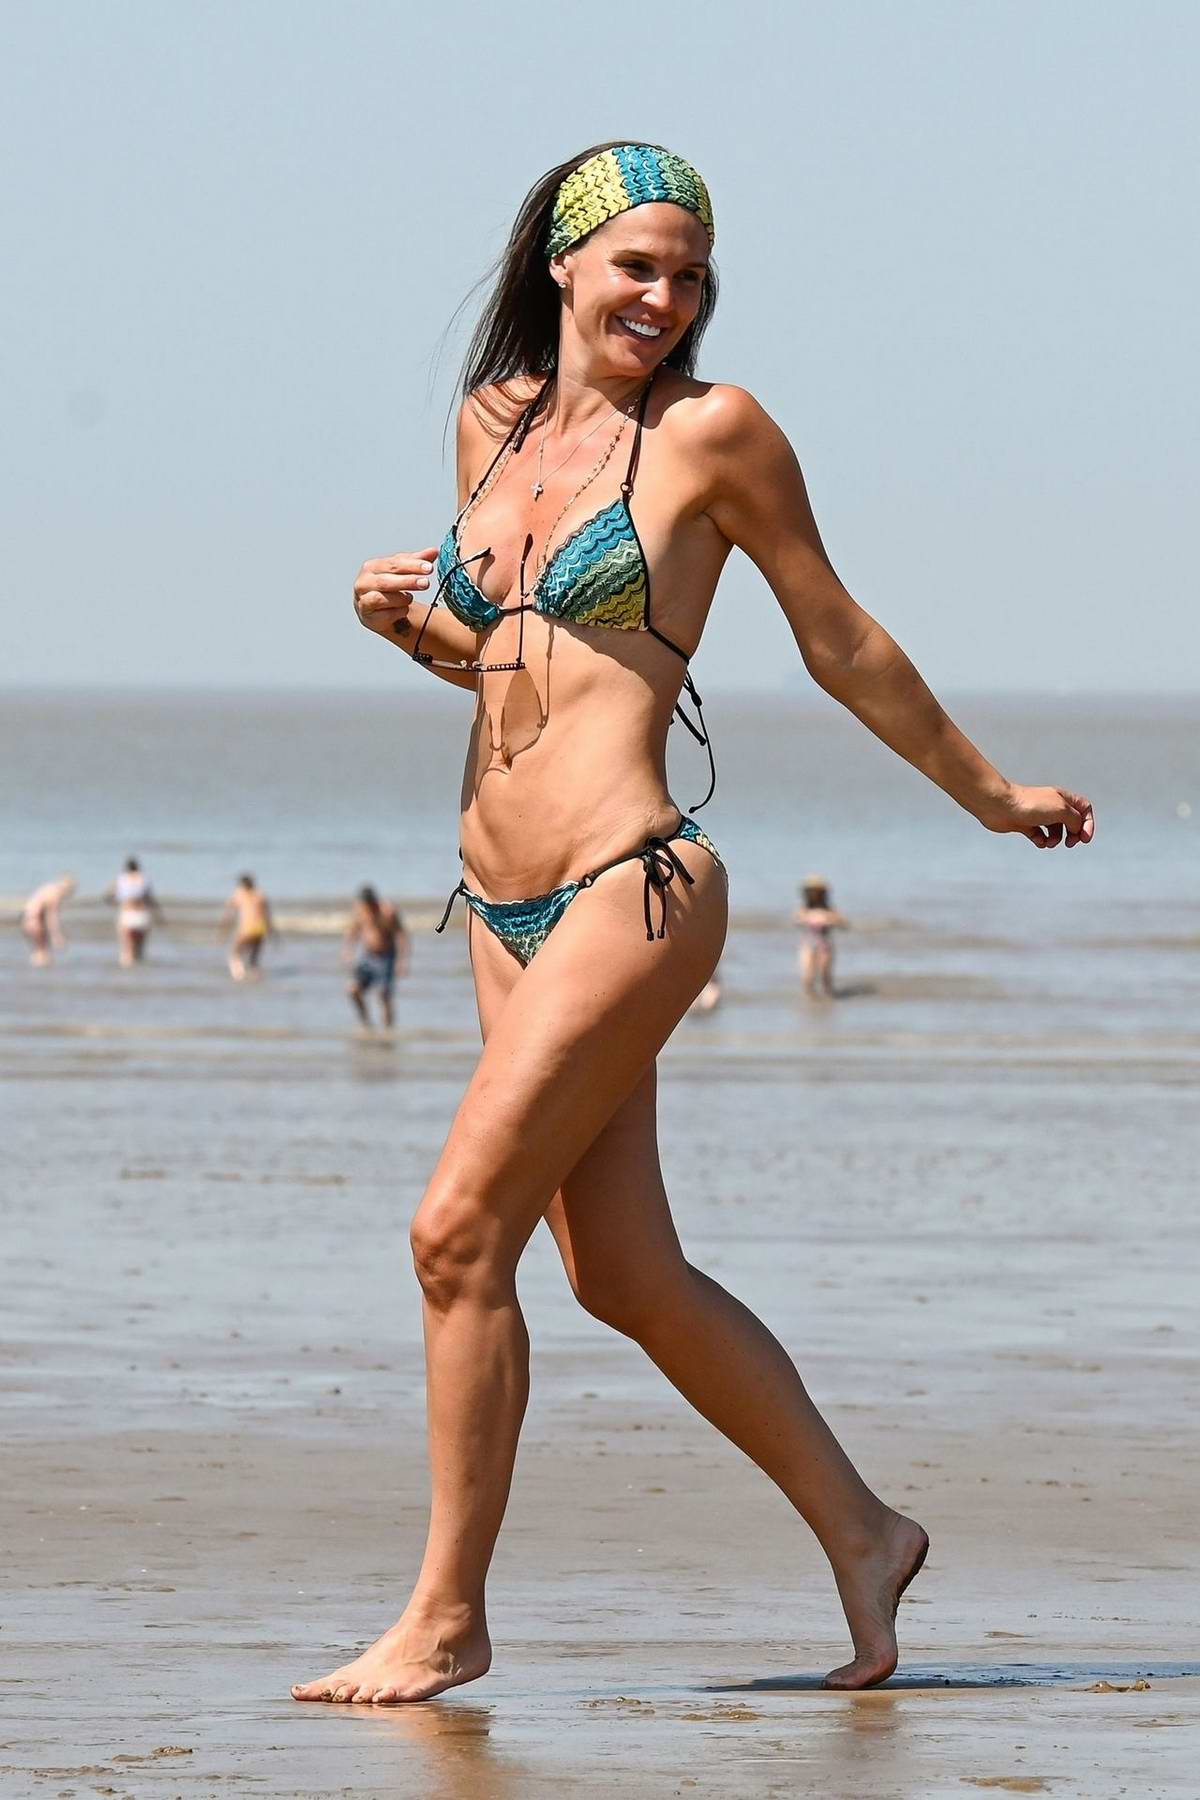 Danielle Lloyd shows off her bikini body on the hottest day of the year at Weston-super-Mare beach, UK